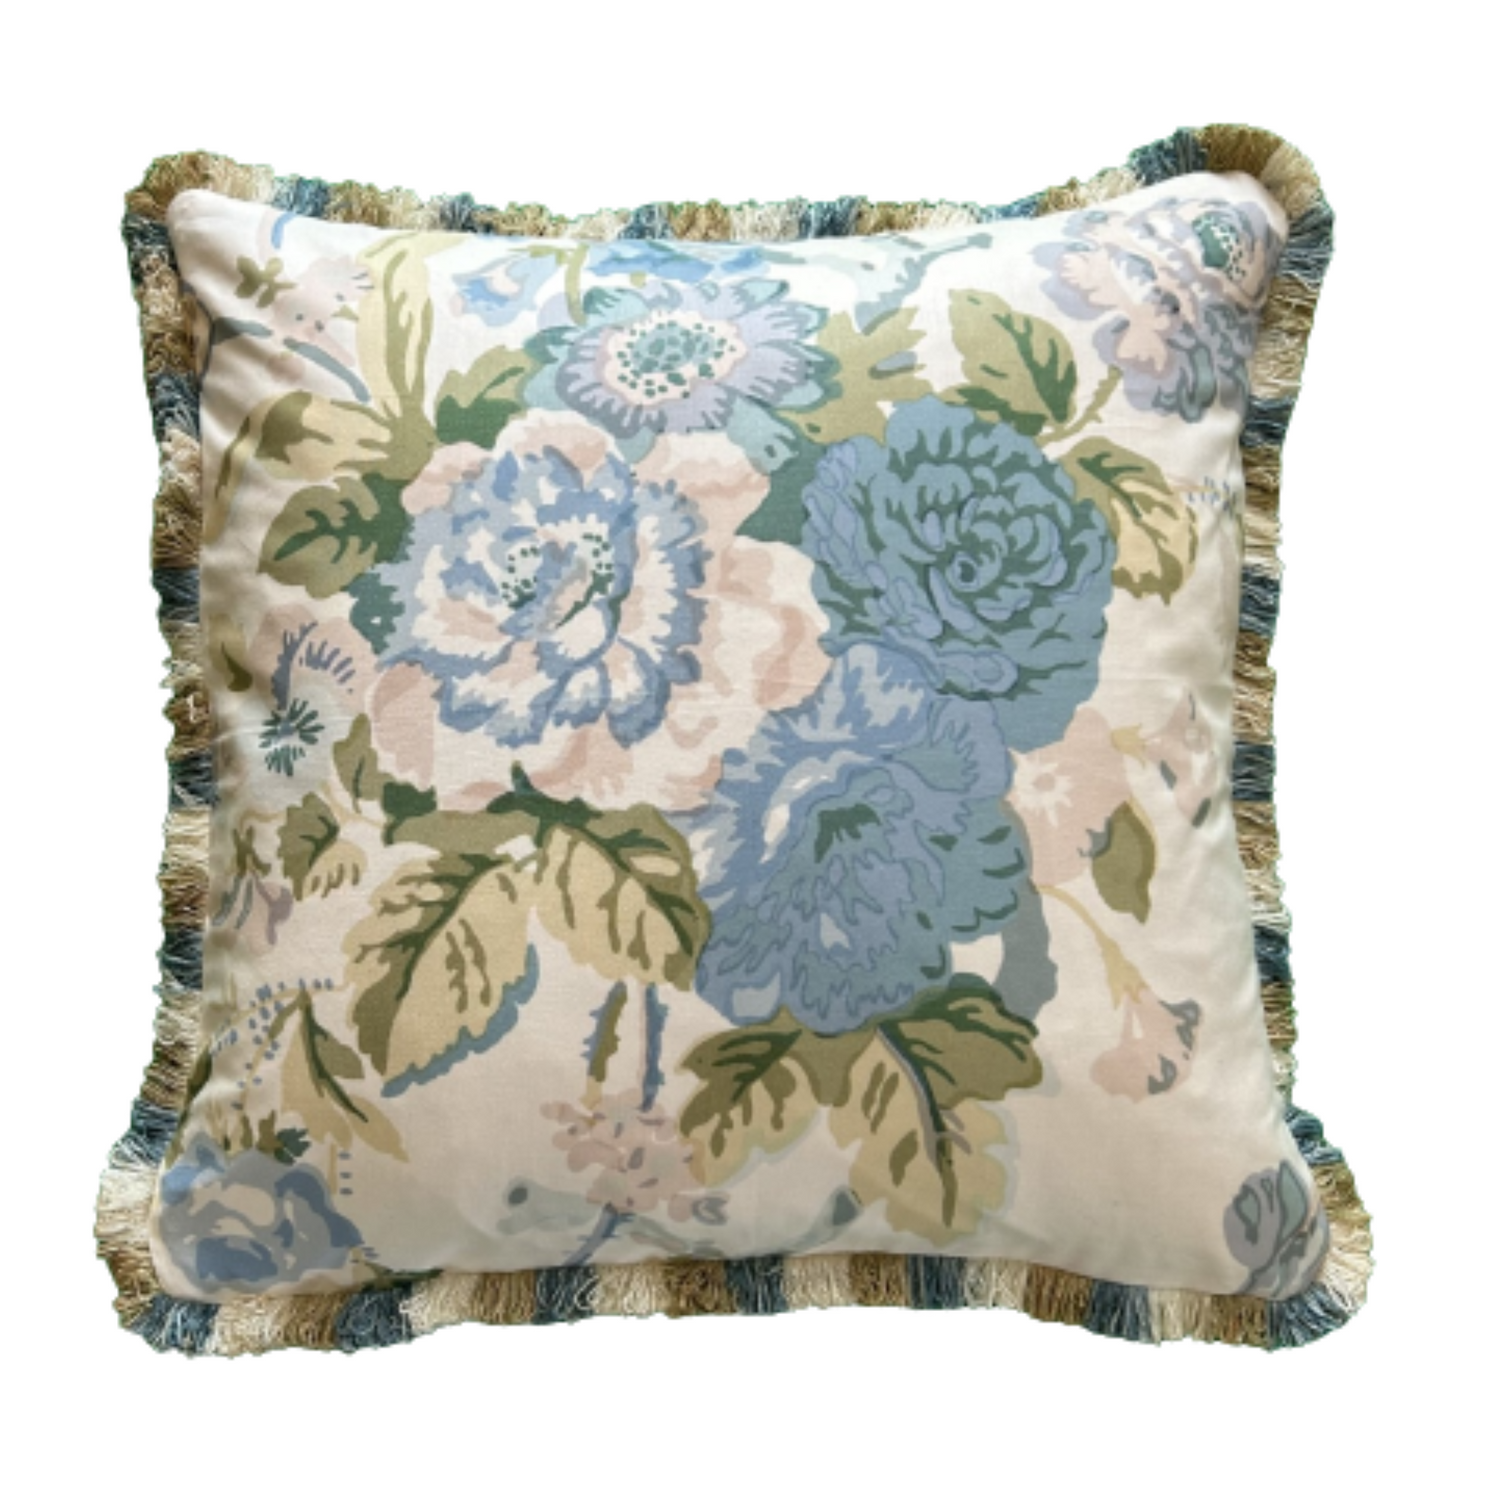 Grenville Lee Jofa Chintz 16 x 16 Square Decorative Pillow with Down Feather Insert